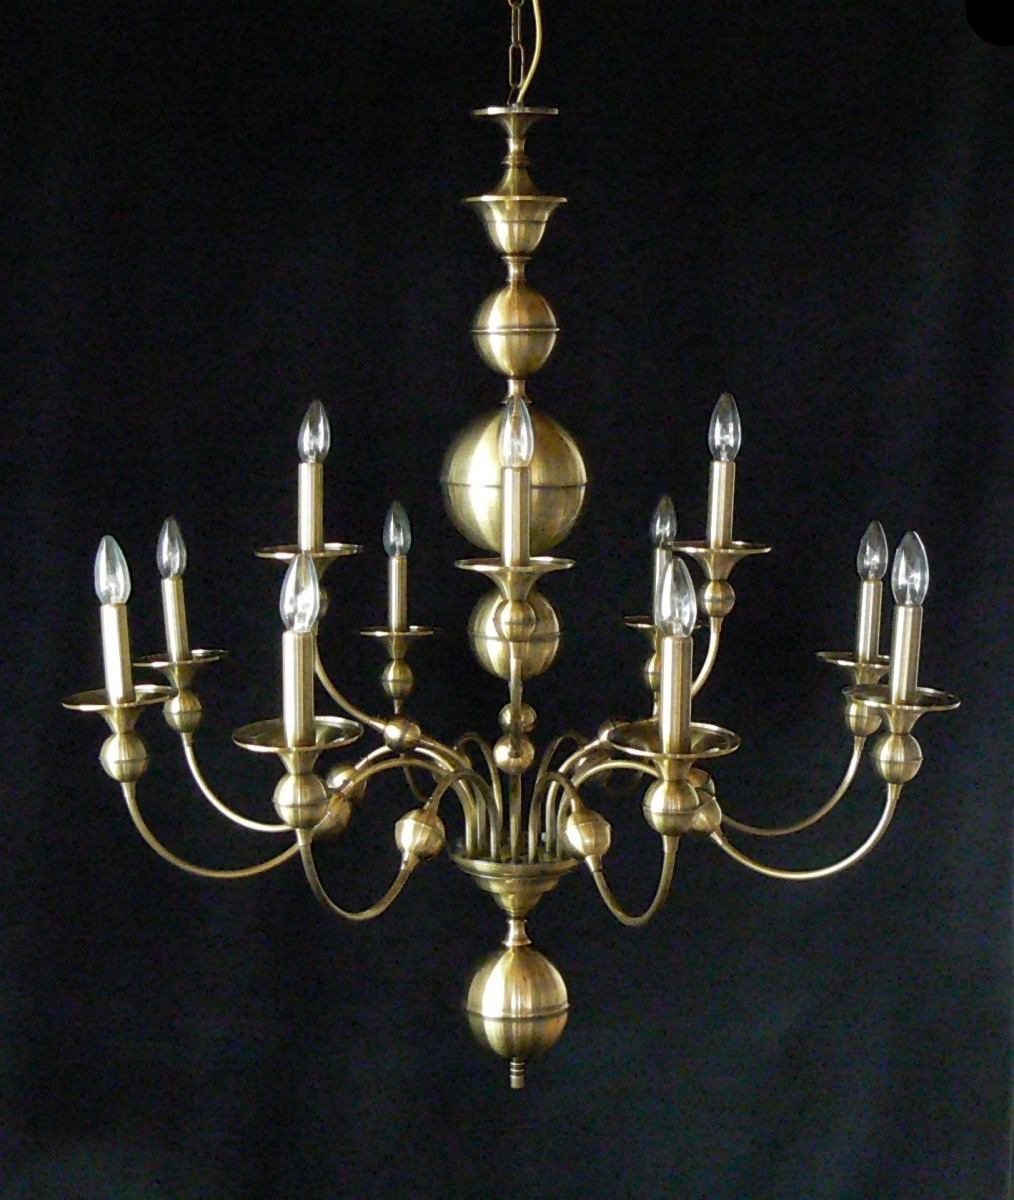 12 Arms stained Dutch chandelier made of manually pressed brass